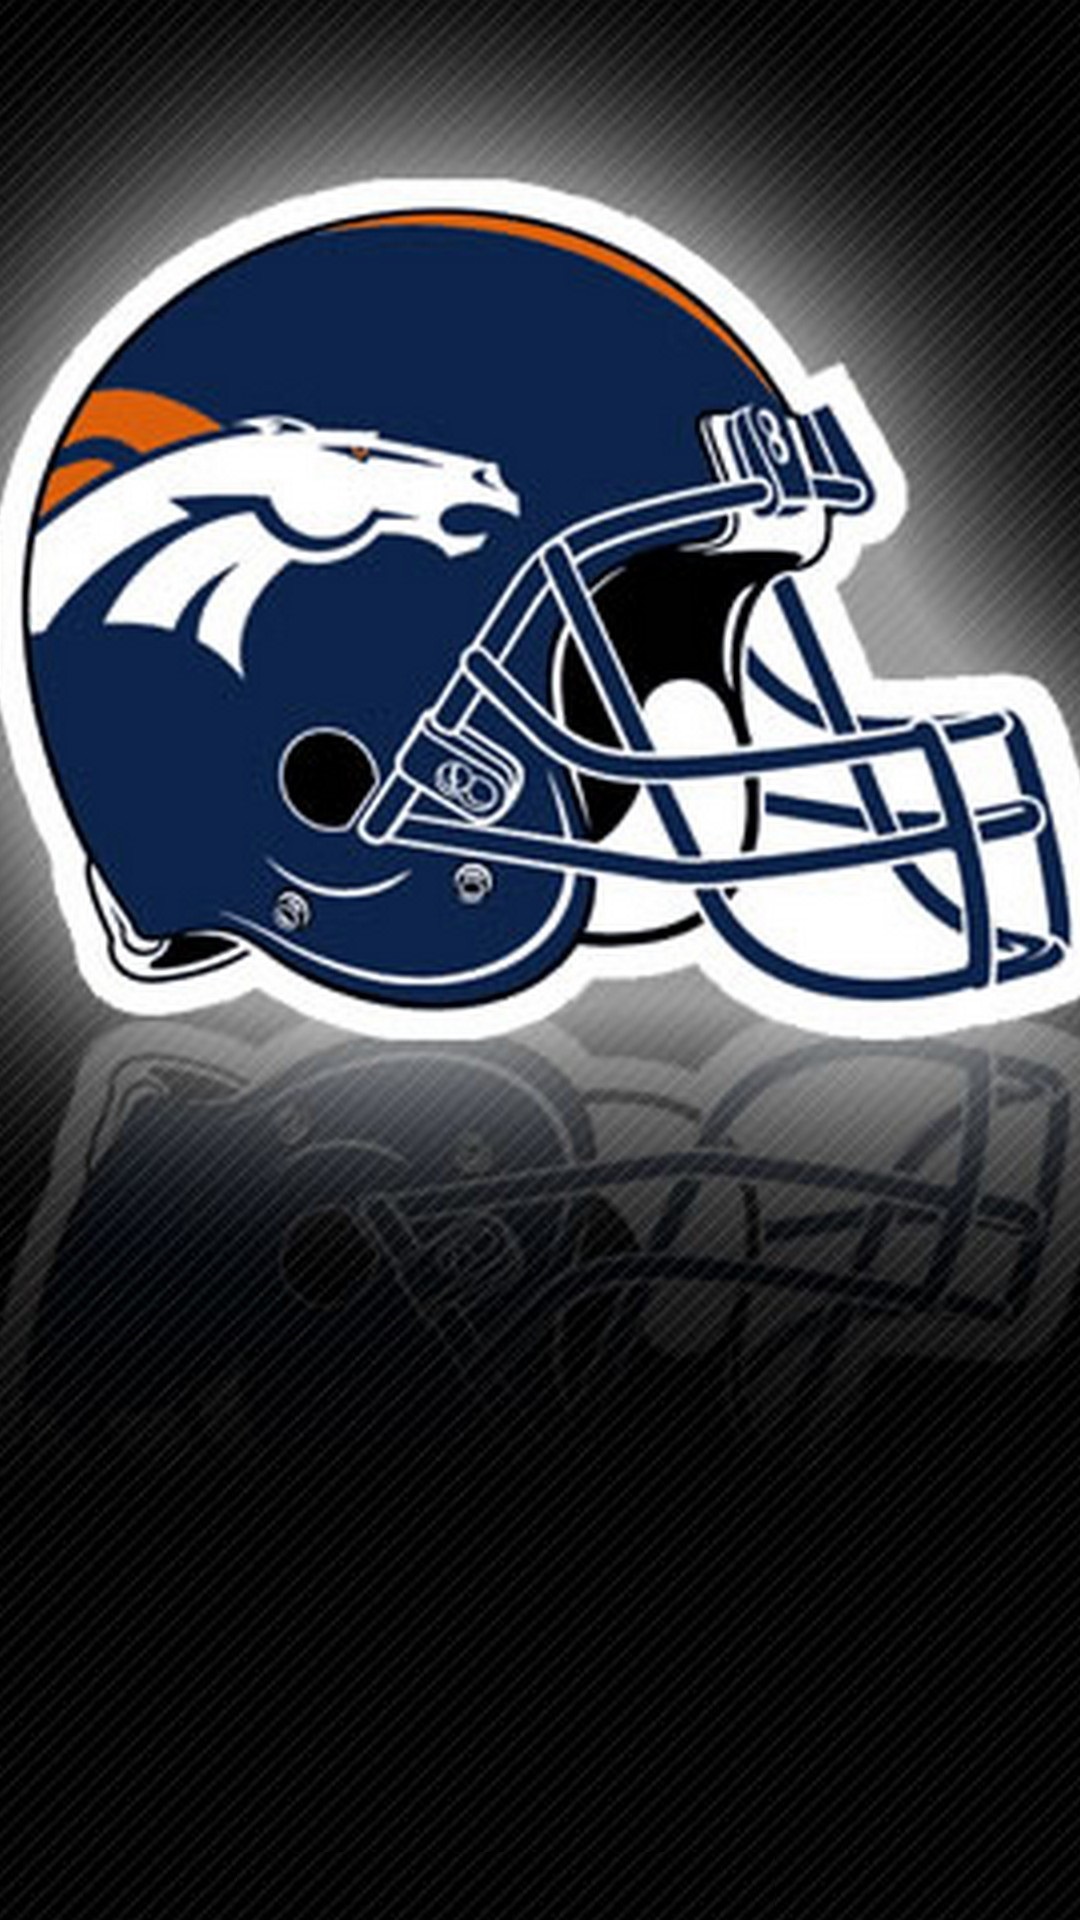 Denver Broncos iPhone Wallpaper Design with high-resolution 1080x1920 pixel. Download and set as wallpaper for Apple iPhone X, XS Max, XR, 8, 7, 6, SE, iPad, Android